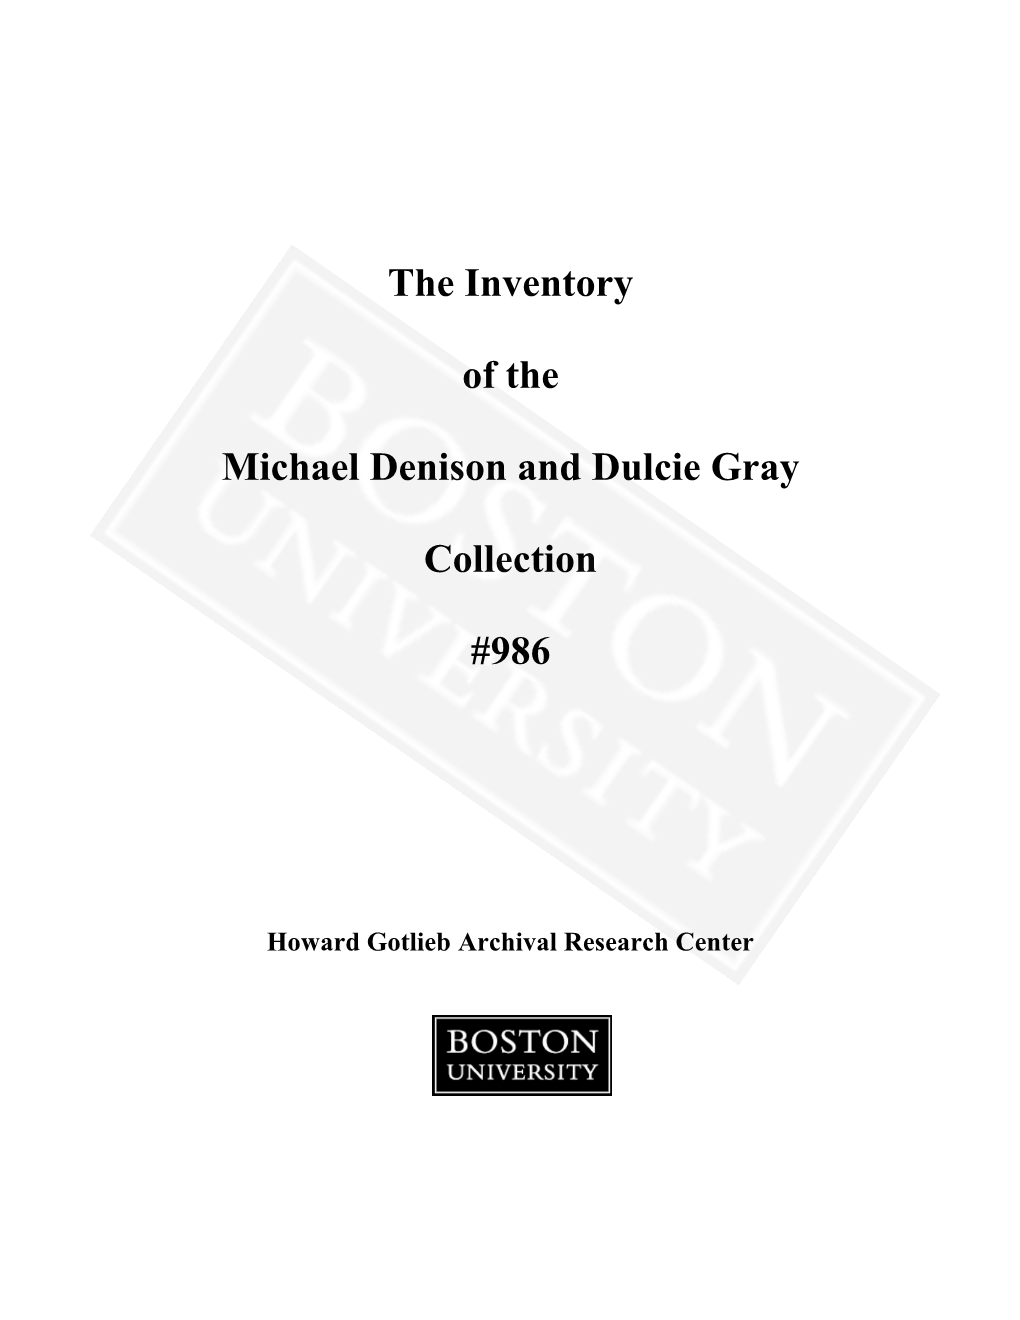 The Inventory of the Michael Denison and Dulcie Gray Collection #986